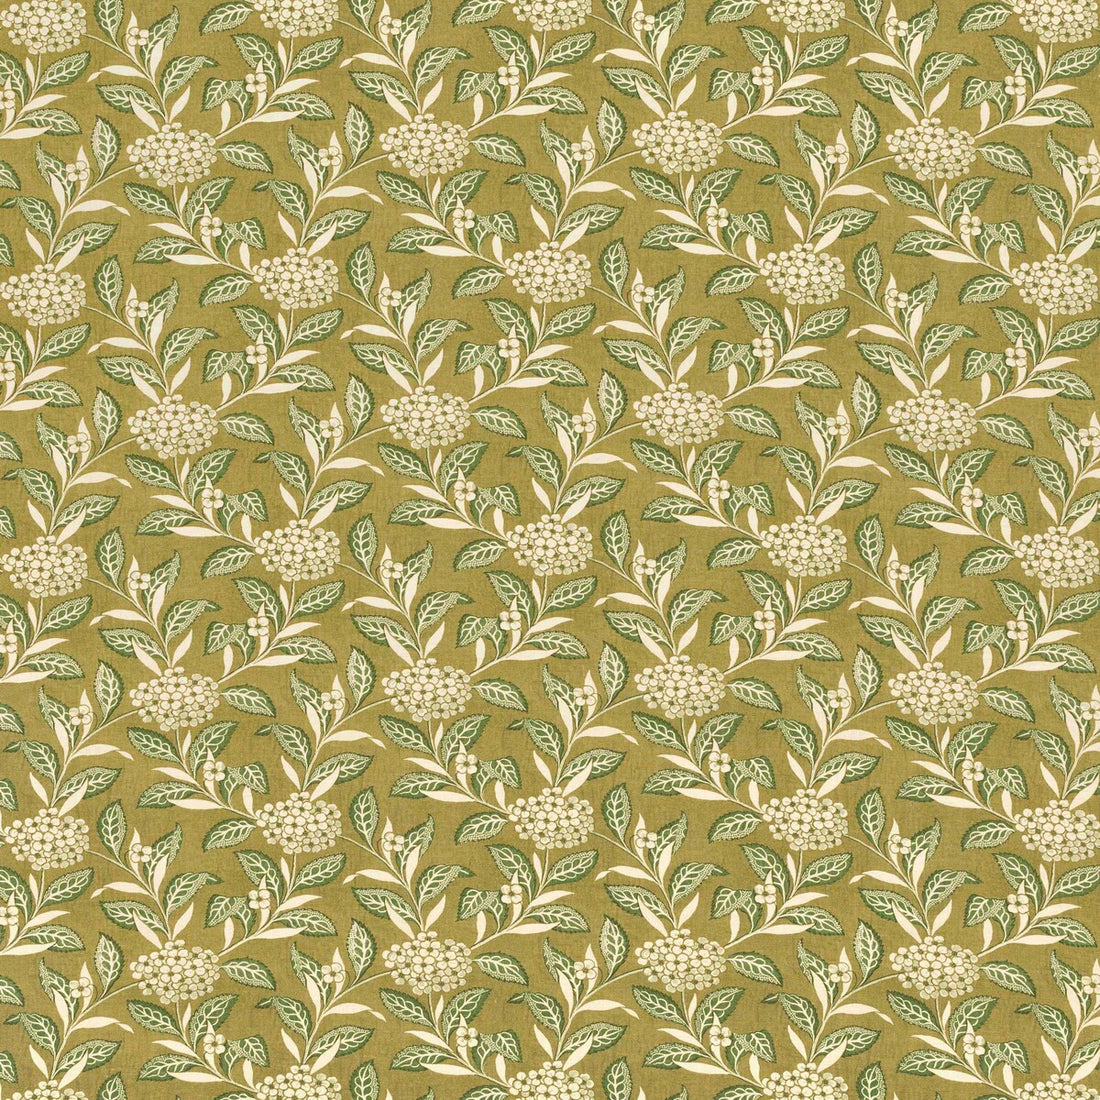 Ortensia fabric in sage on olive color - pattern 2023133.330.0 - by Lee Jofa in the Paolo Moschino Garden II collection